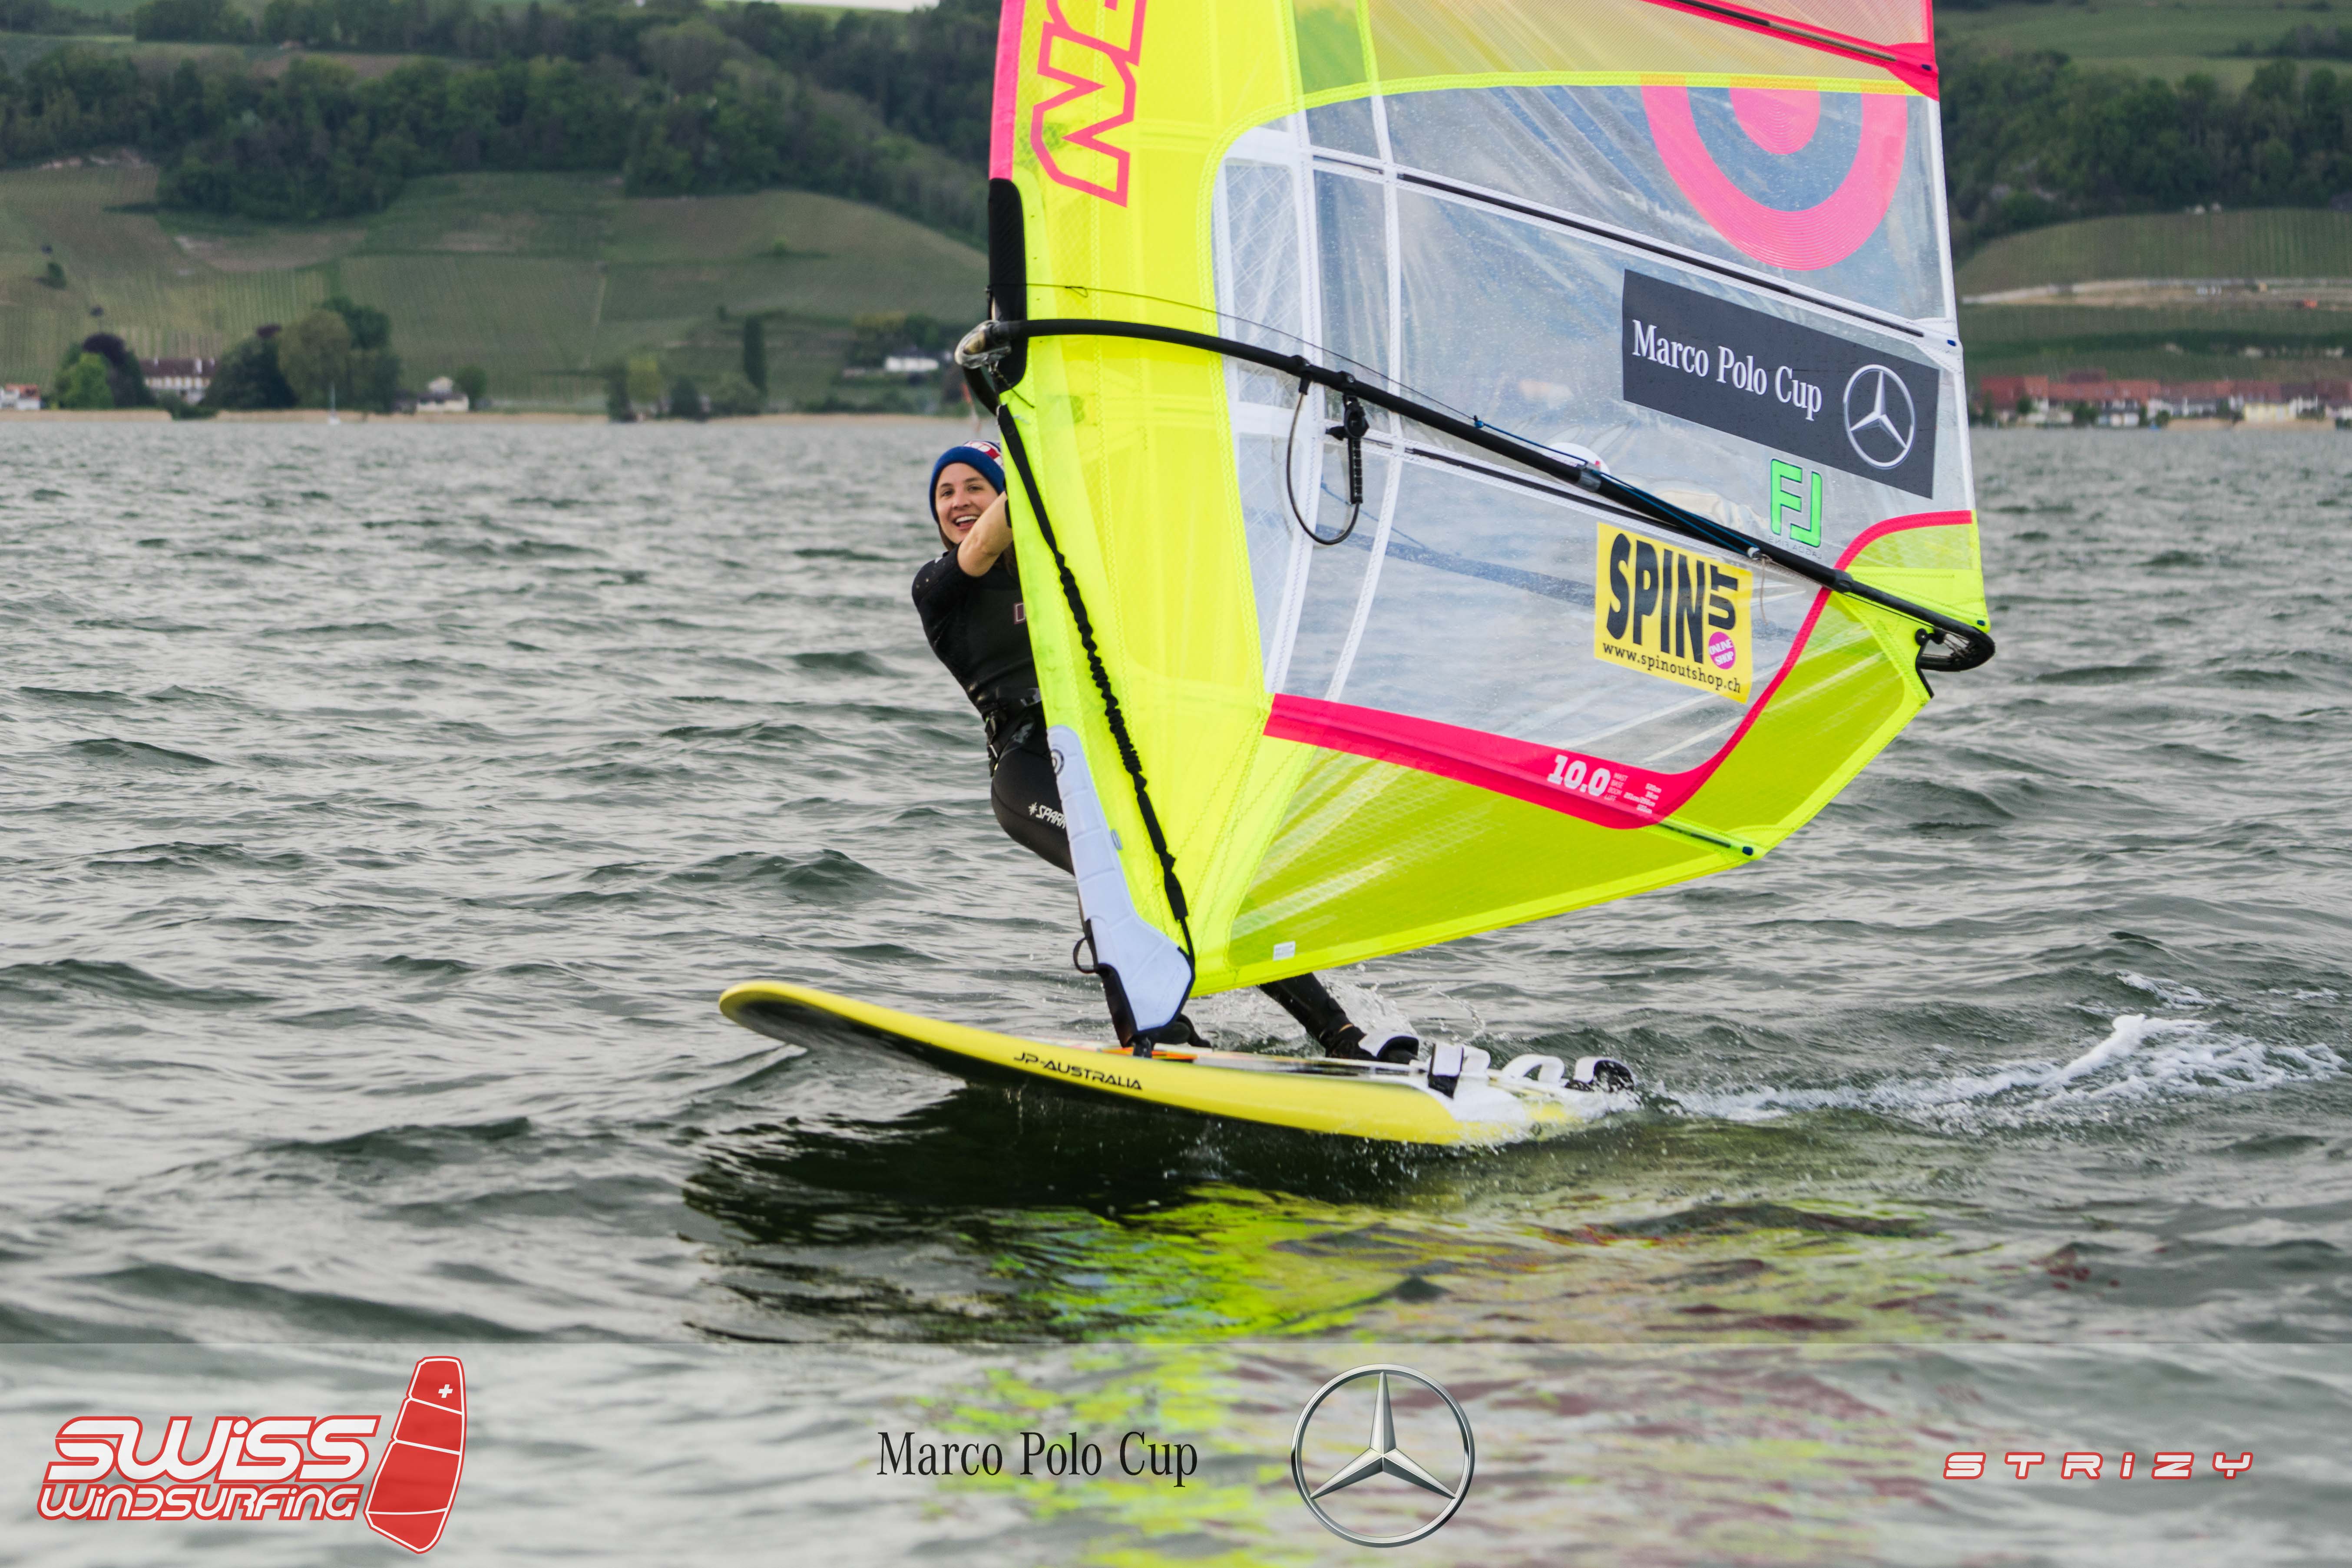  Windsurfing  Marco Polo Cup 2017  Slalom and Formula  Walensee  Final results